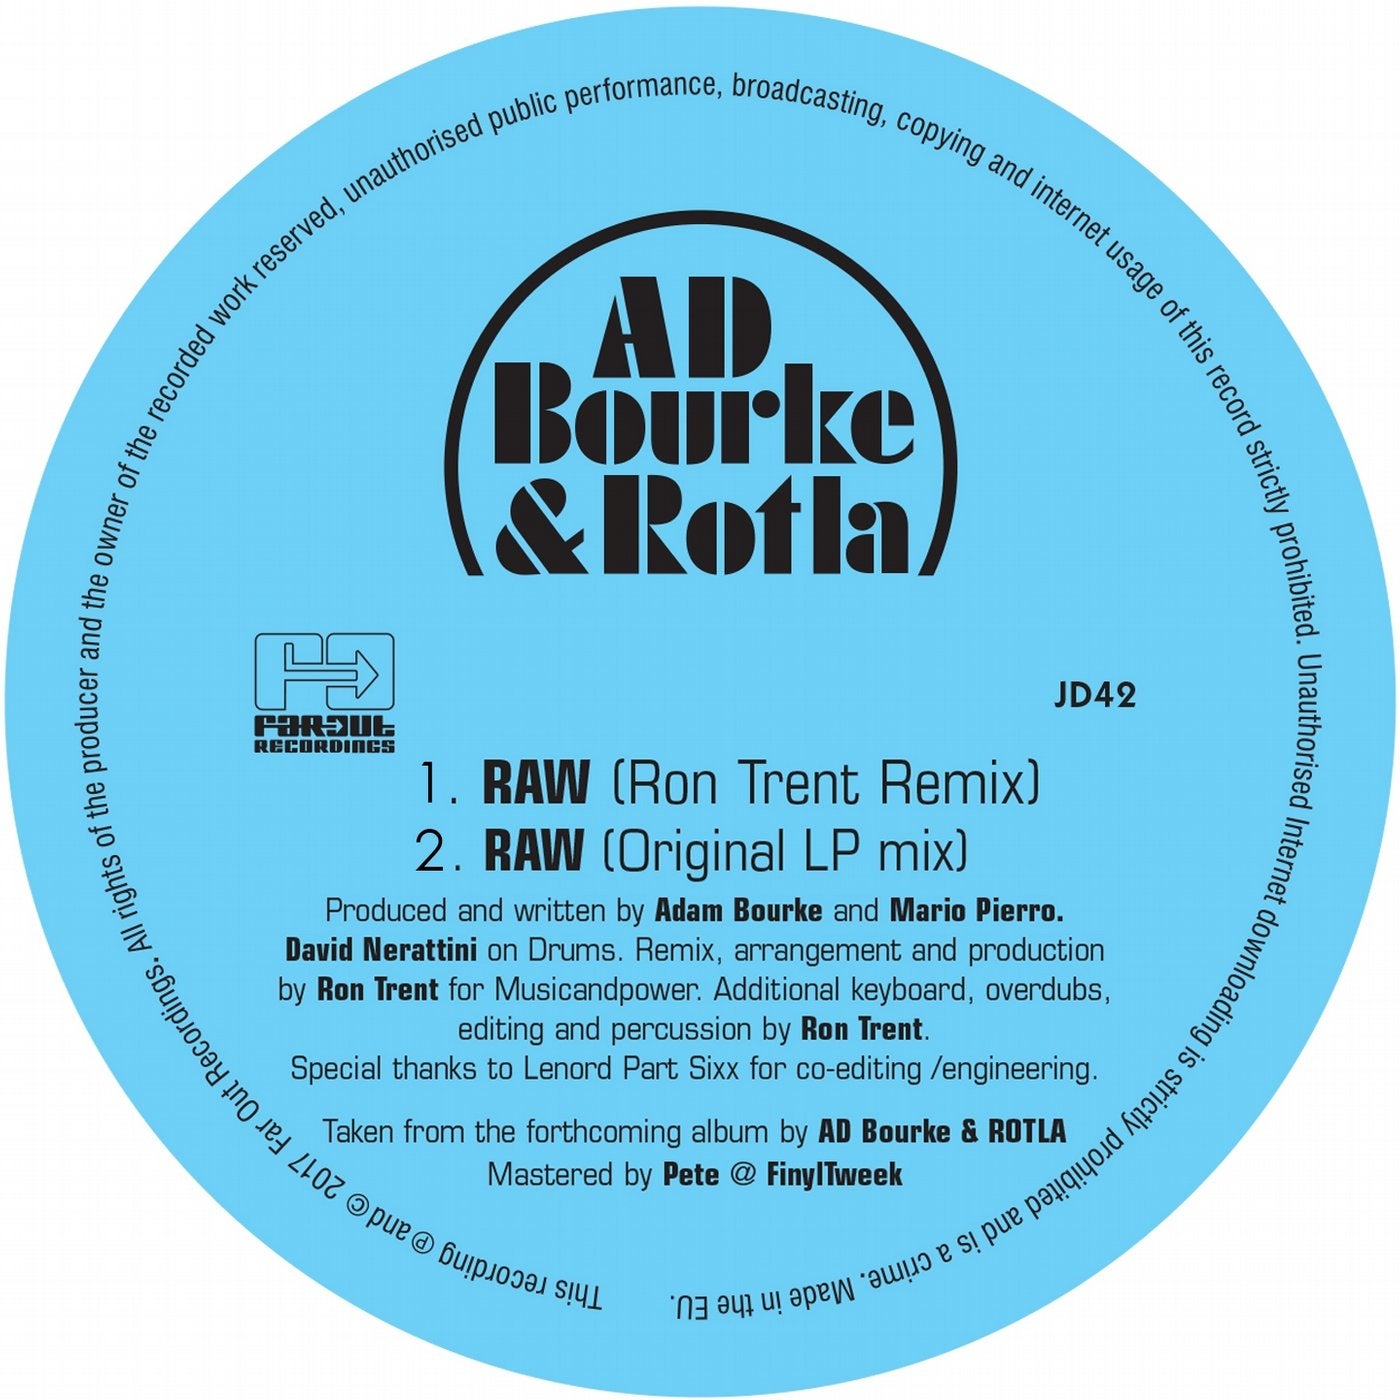 Raw (Including Ron Trent Remix)